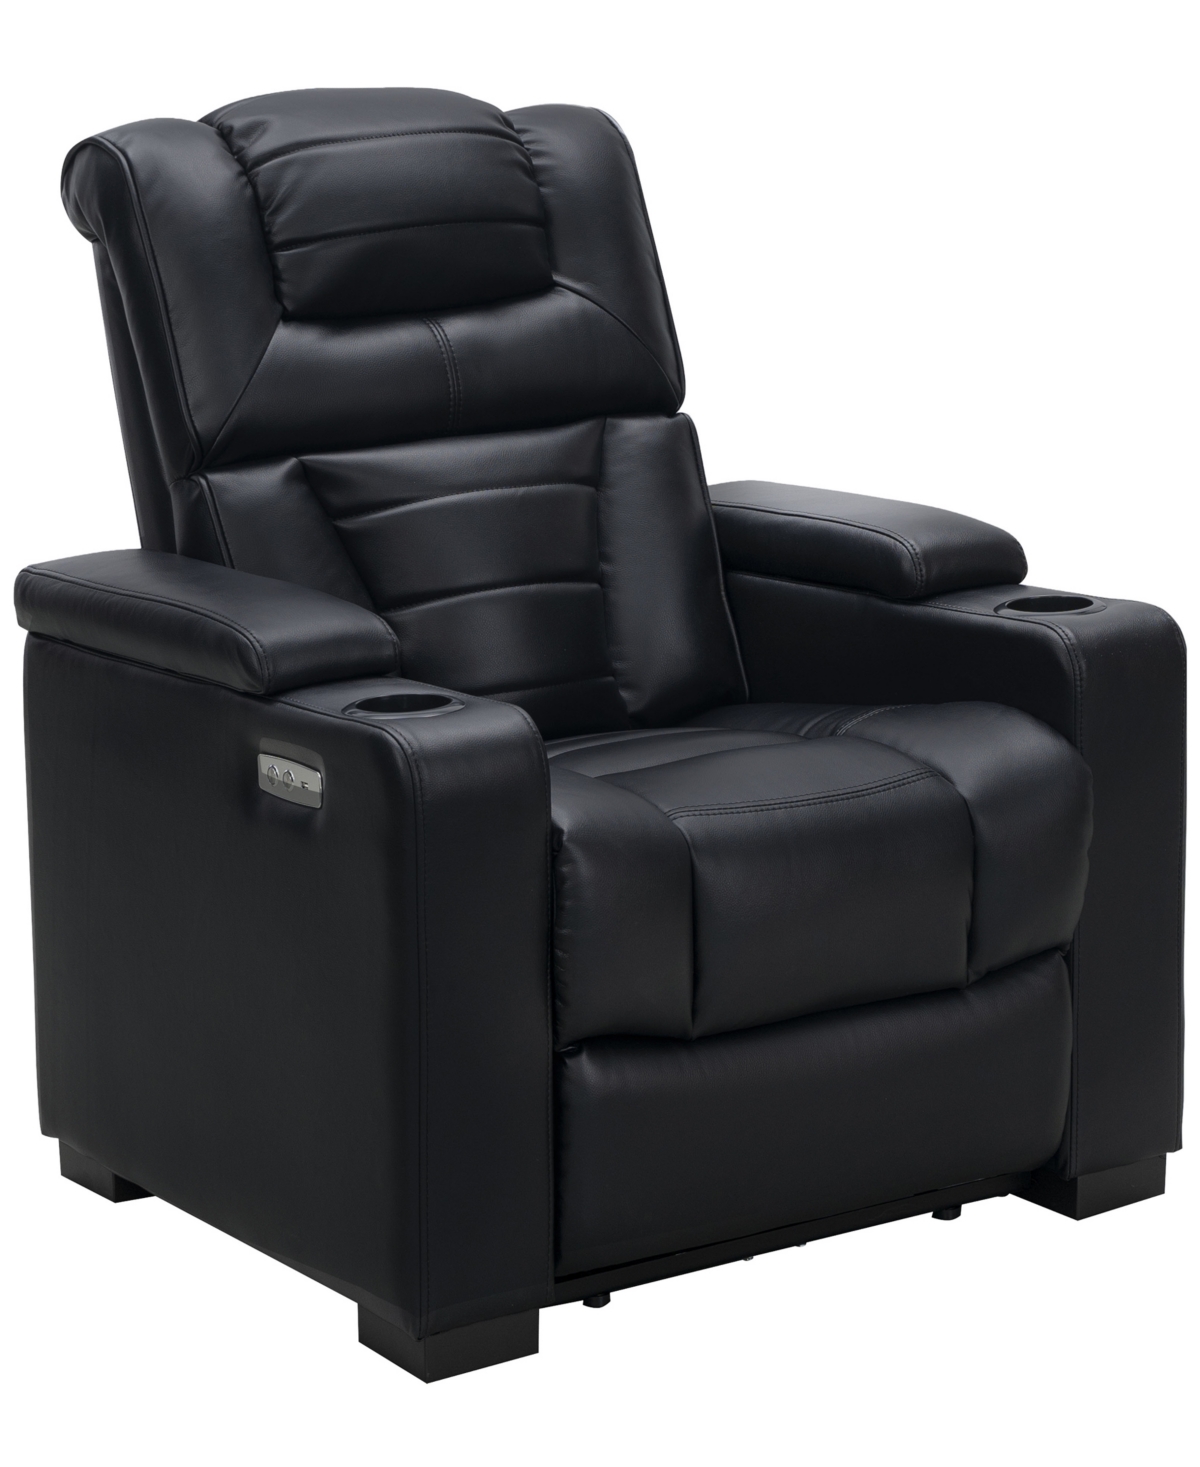 Abbyson Living Galaxy 36.5" Power Theater Recliner In Black